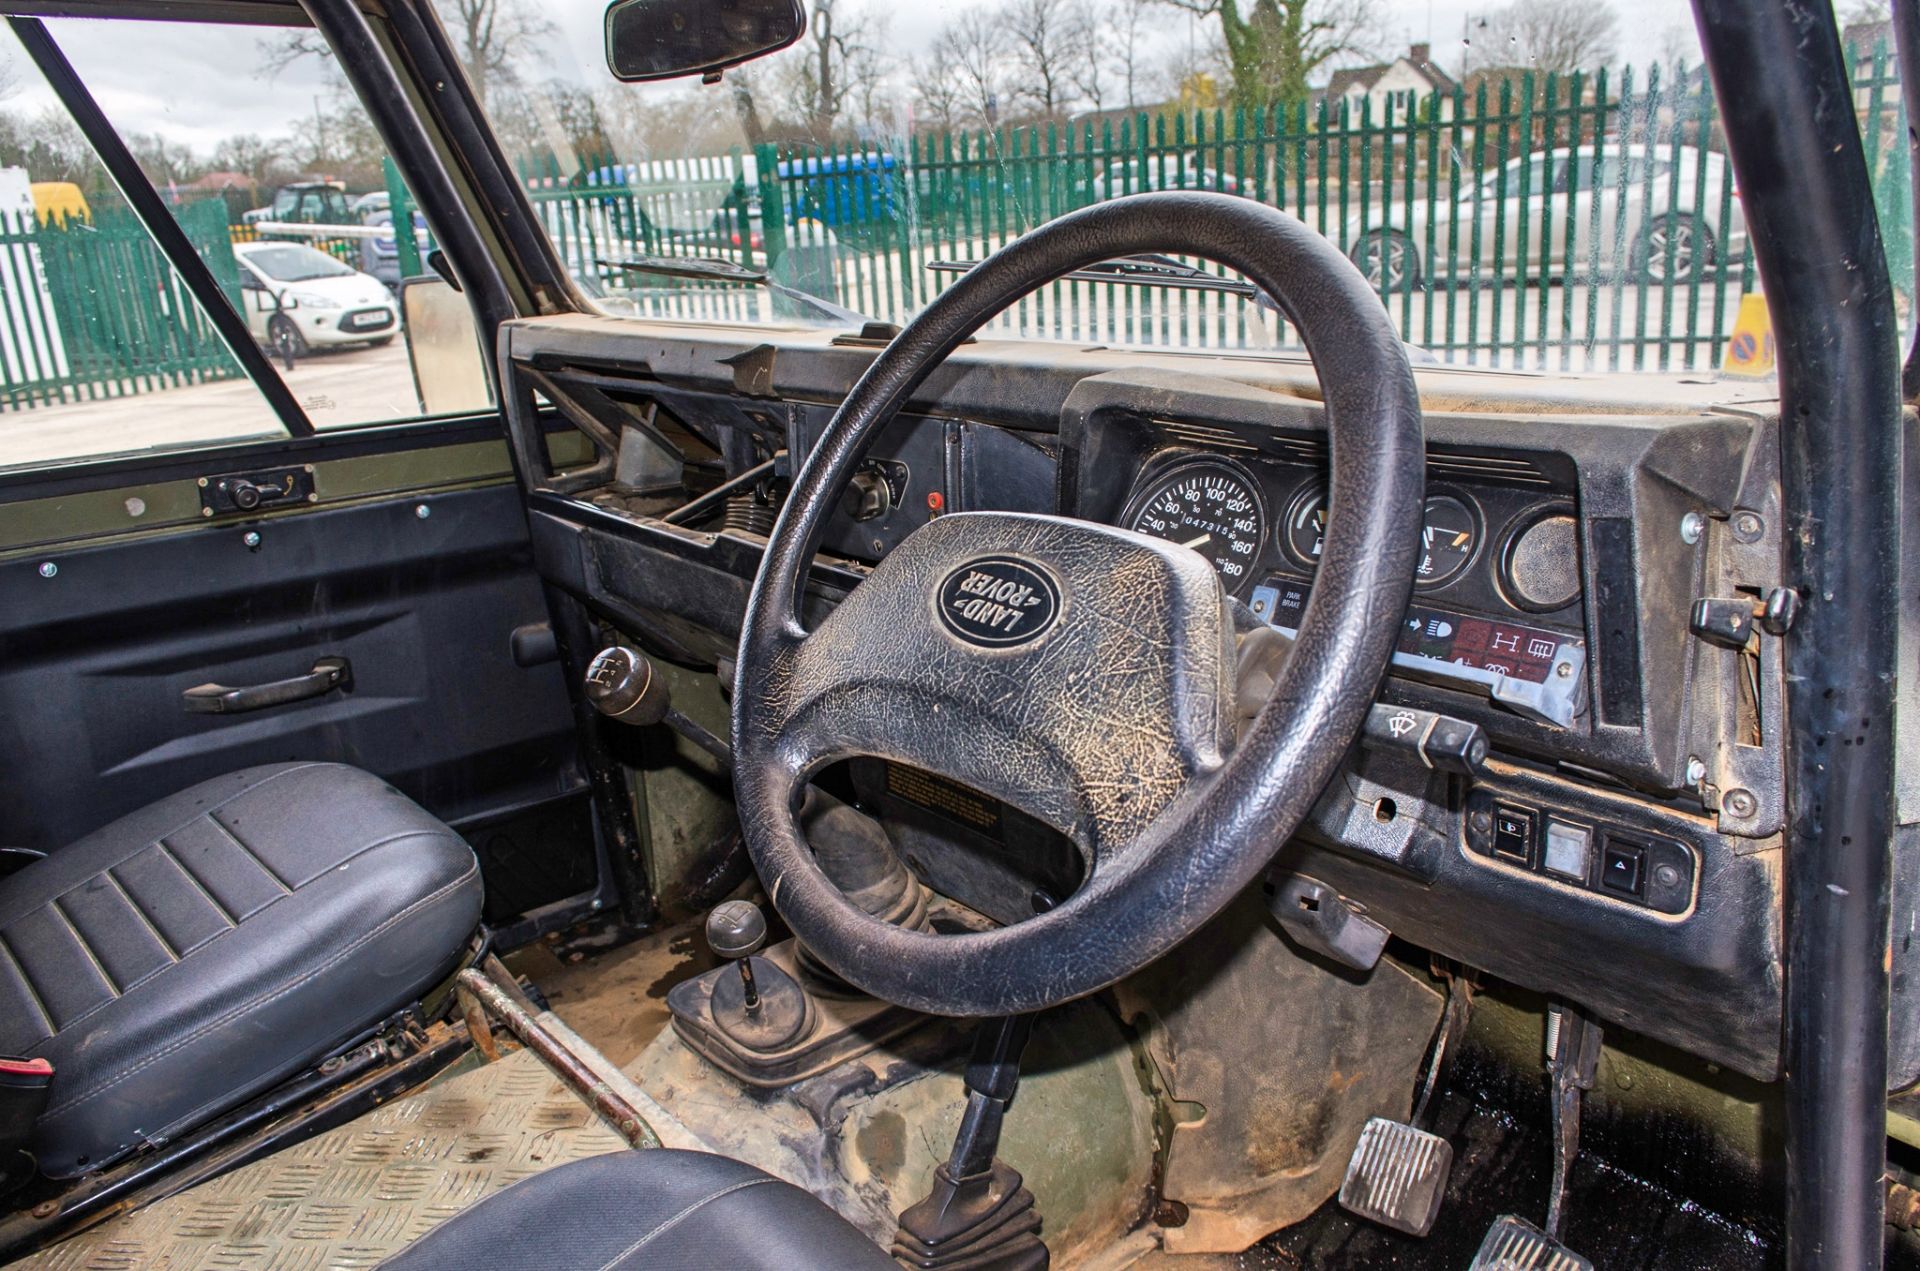 1997 Land Rover Defender 90 WOLF 2.5 litre 300TDI 4 wheel drive utility vehicle Ex MOD - Image 30 of 45